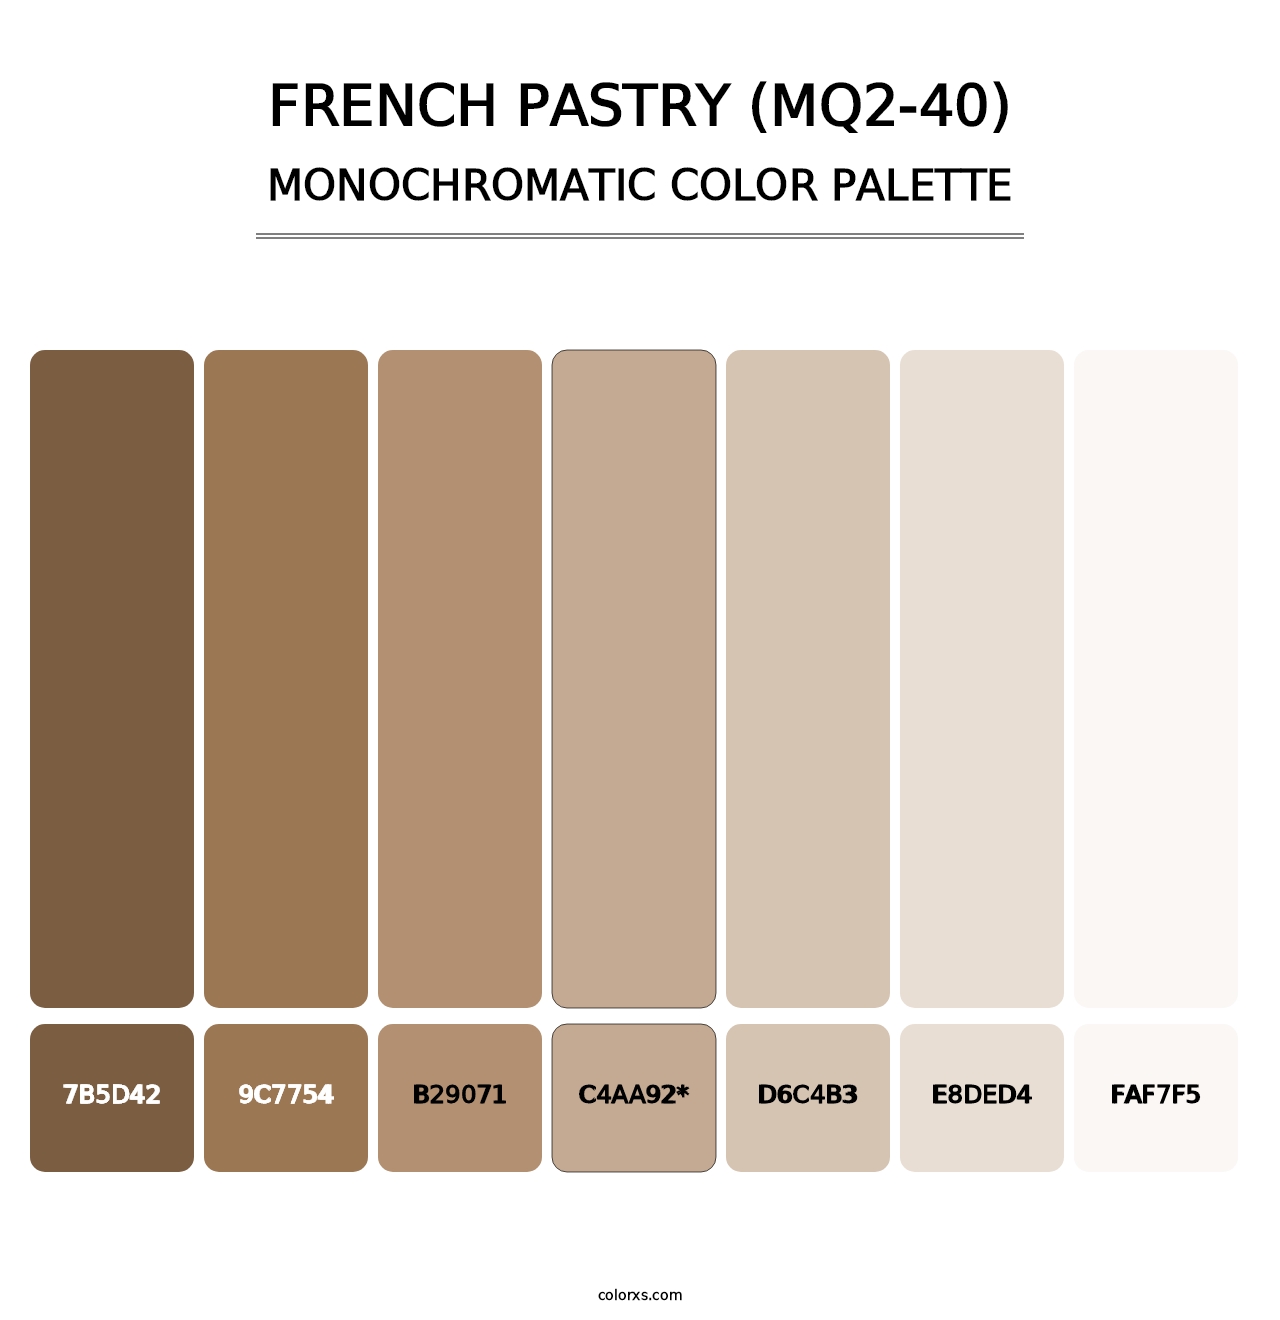 French Pastry (MQ2-40) - Monochromatic Color Palette